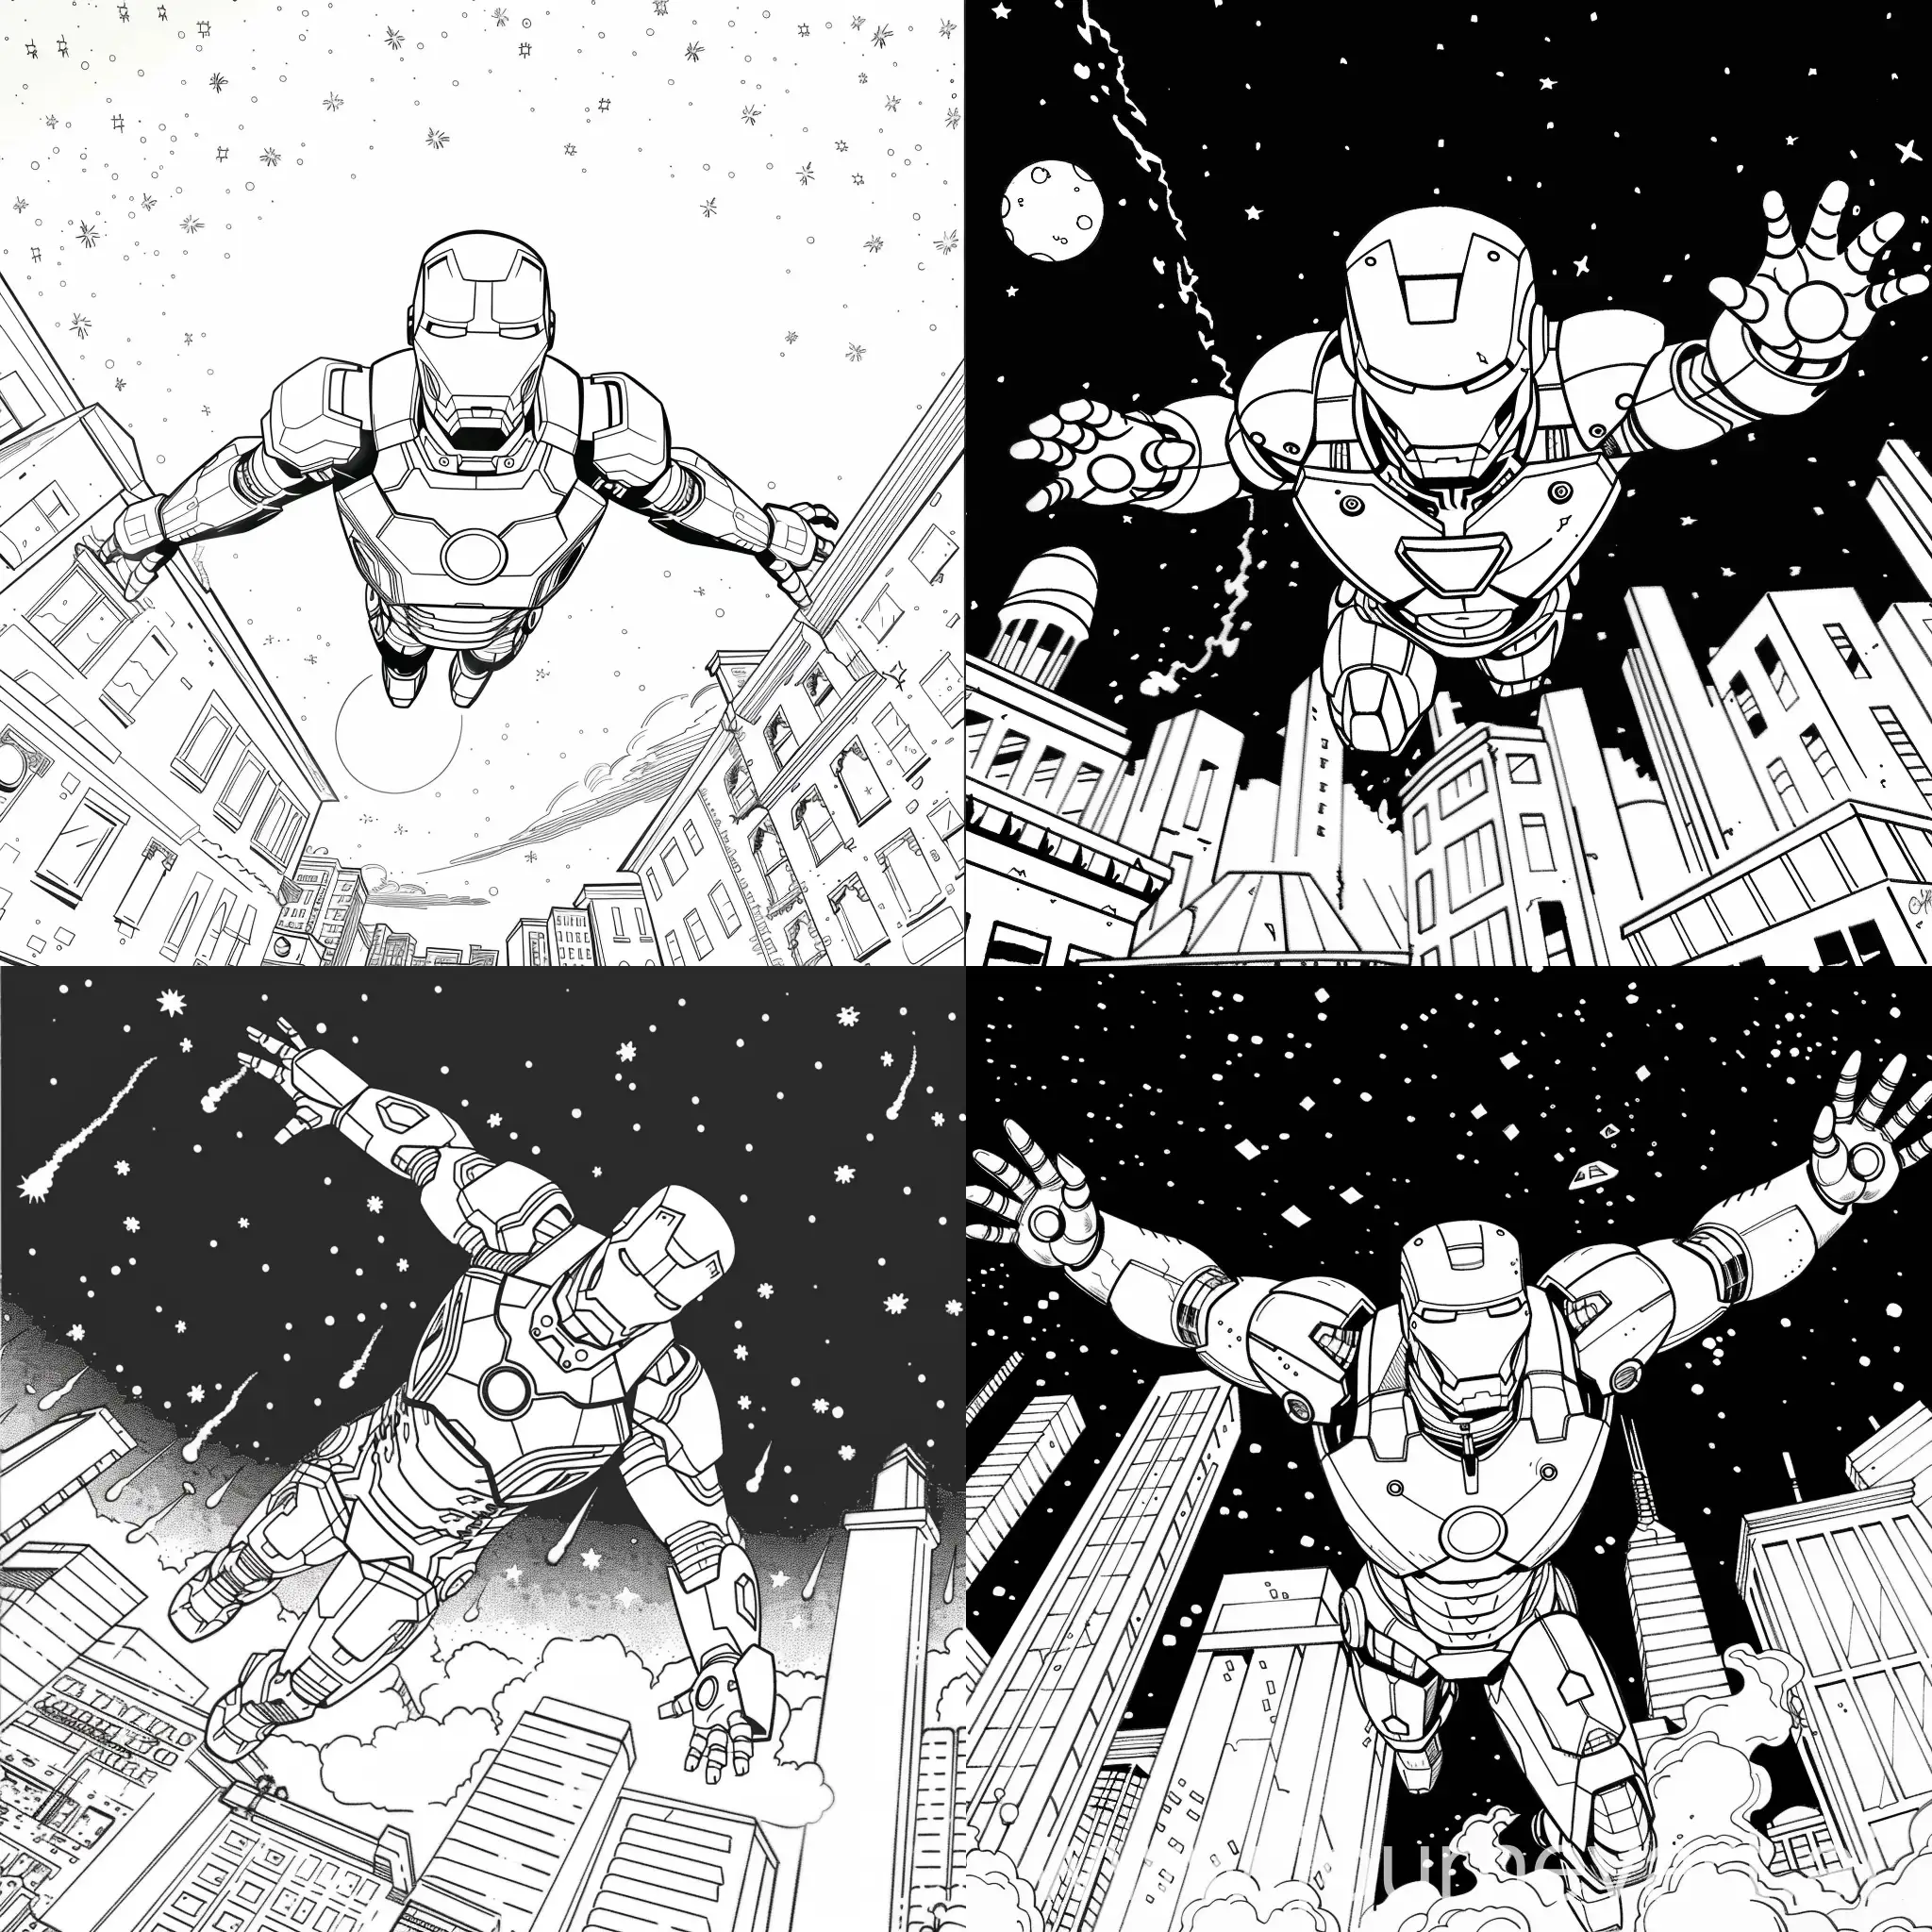  Coloring book page of Iron Man flying over the night city, tony stark, marvel, black and white, cute, simple